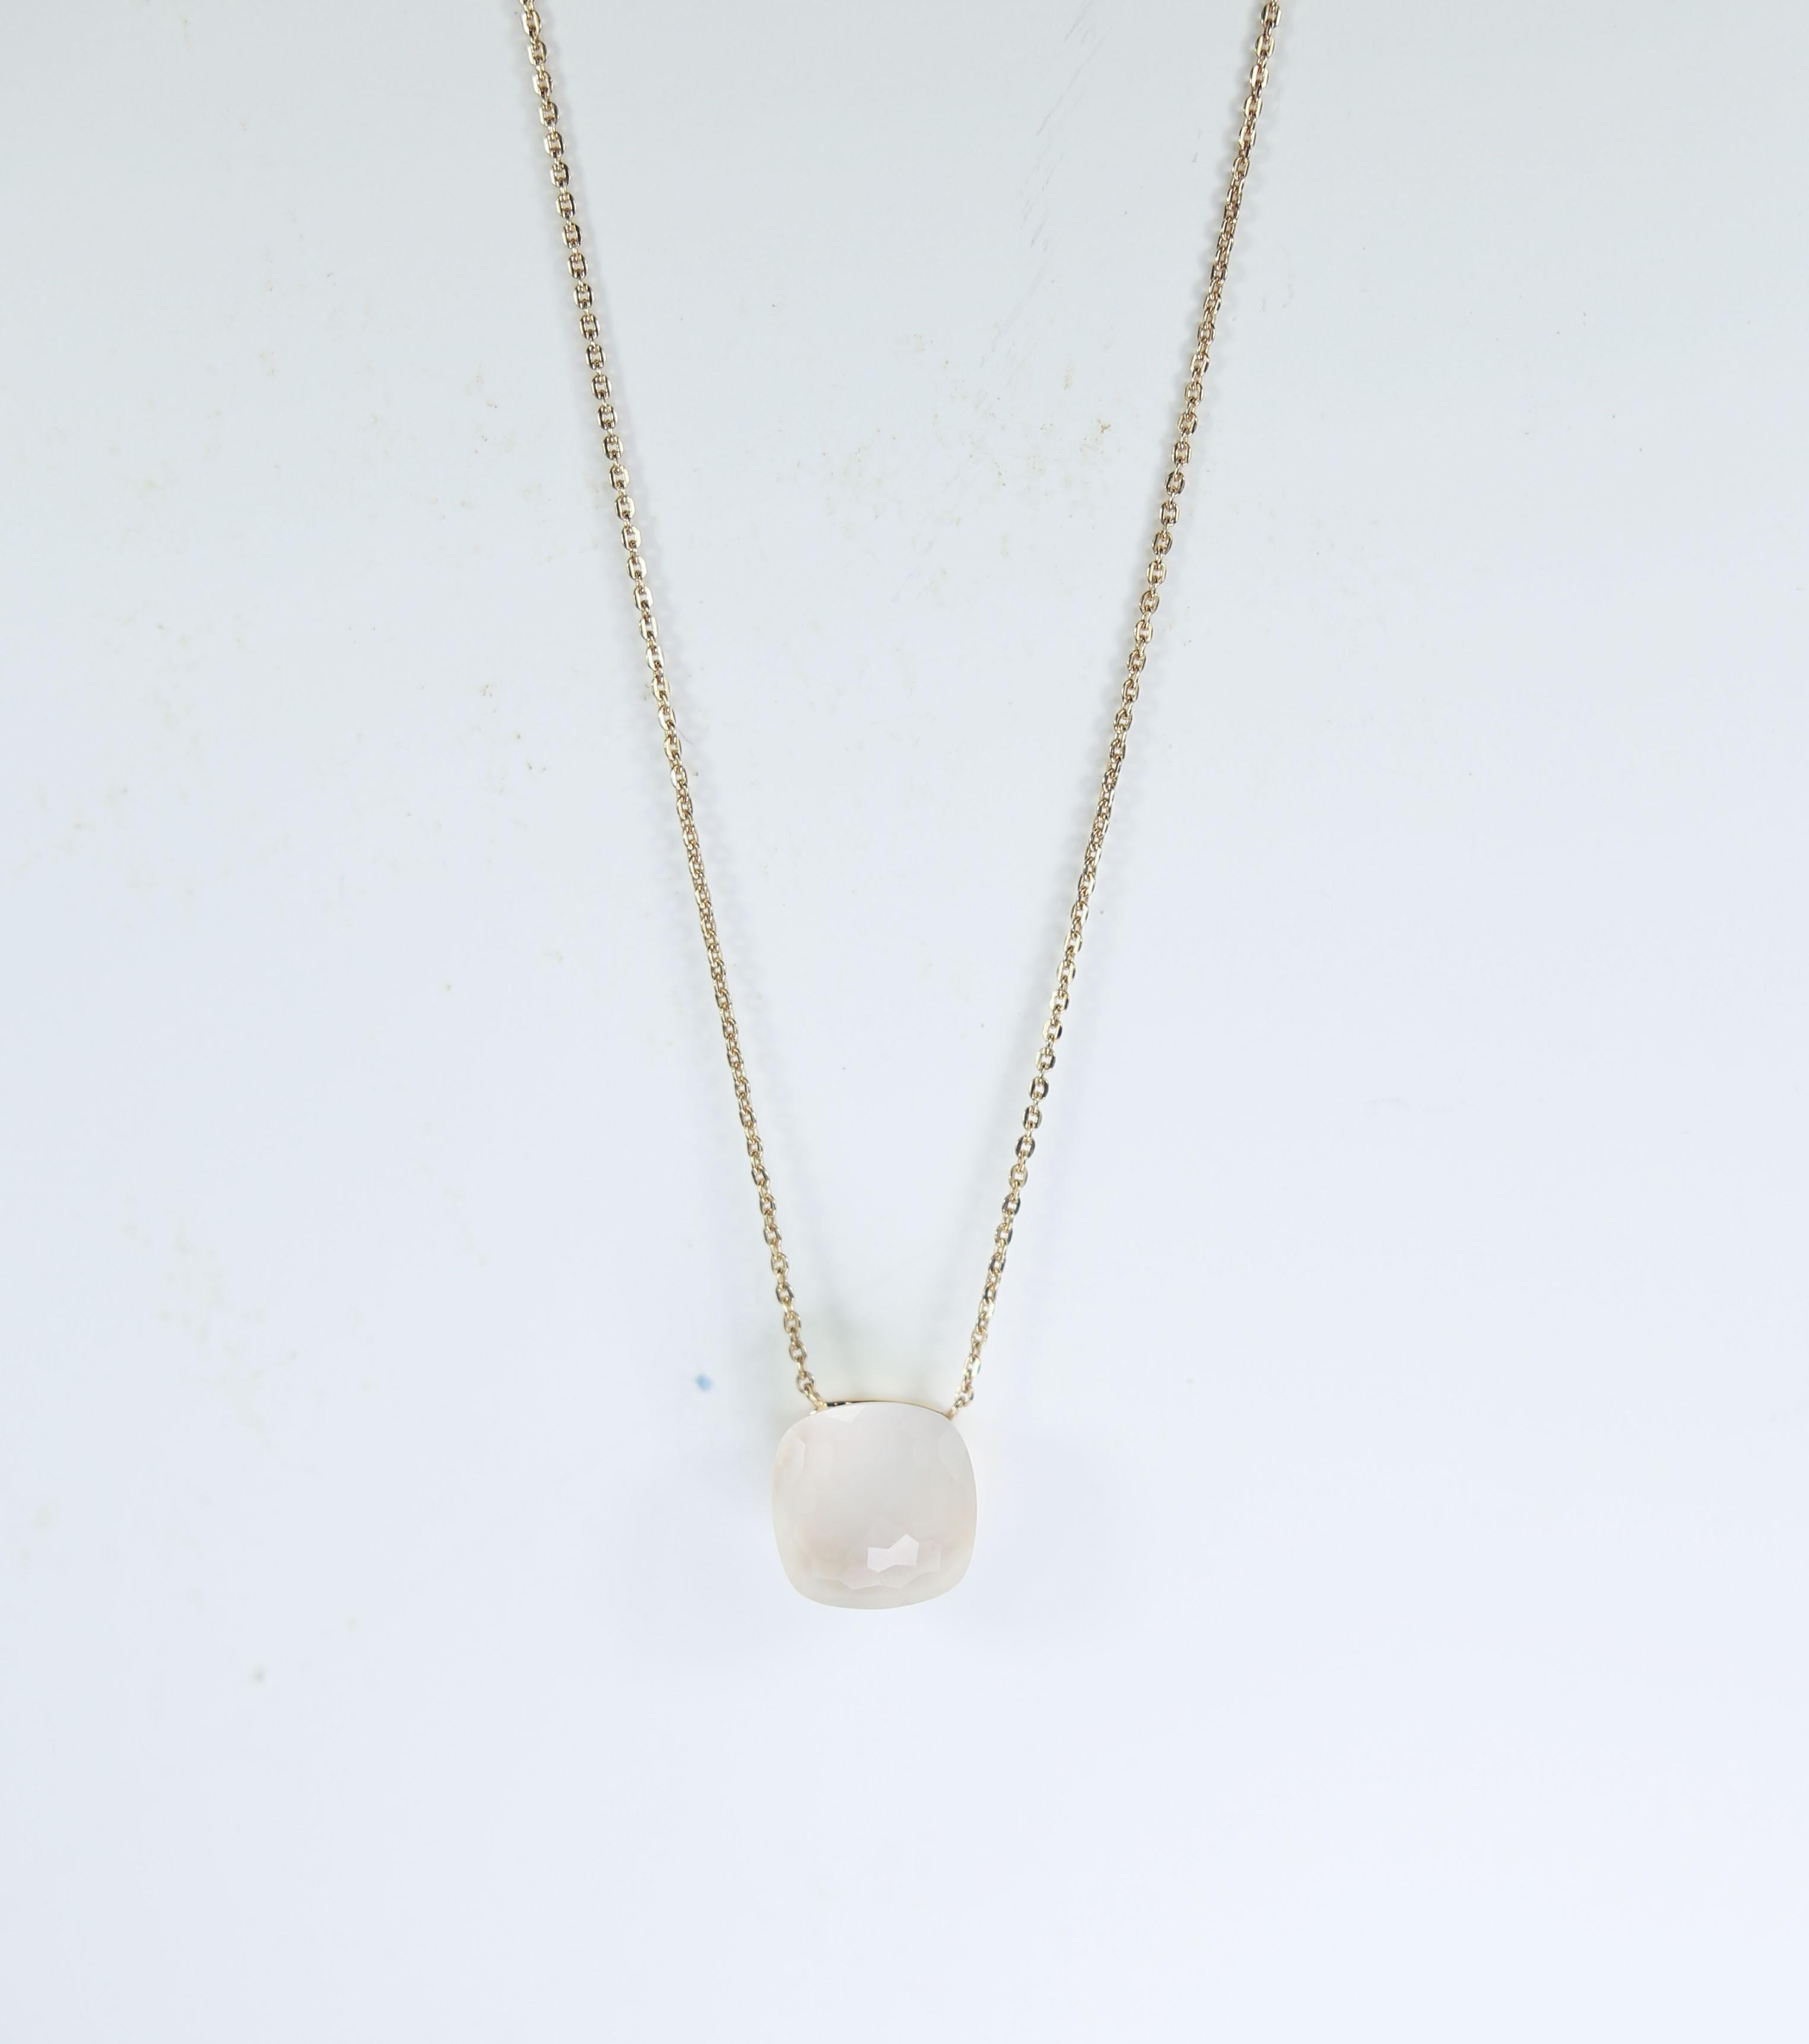 Milky  Quartz 18kt gold pendant chain
Multifaceted stone, available in a range of stunning colors
Green,  citrine, rose quartz, prasolite, topace, amethyst

READY TO SHIP
*Shipment of this piece is not affected by COVID-19. Orders